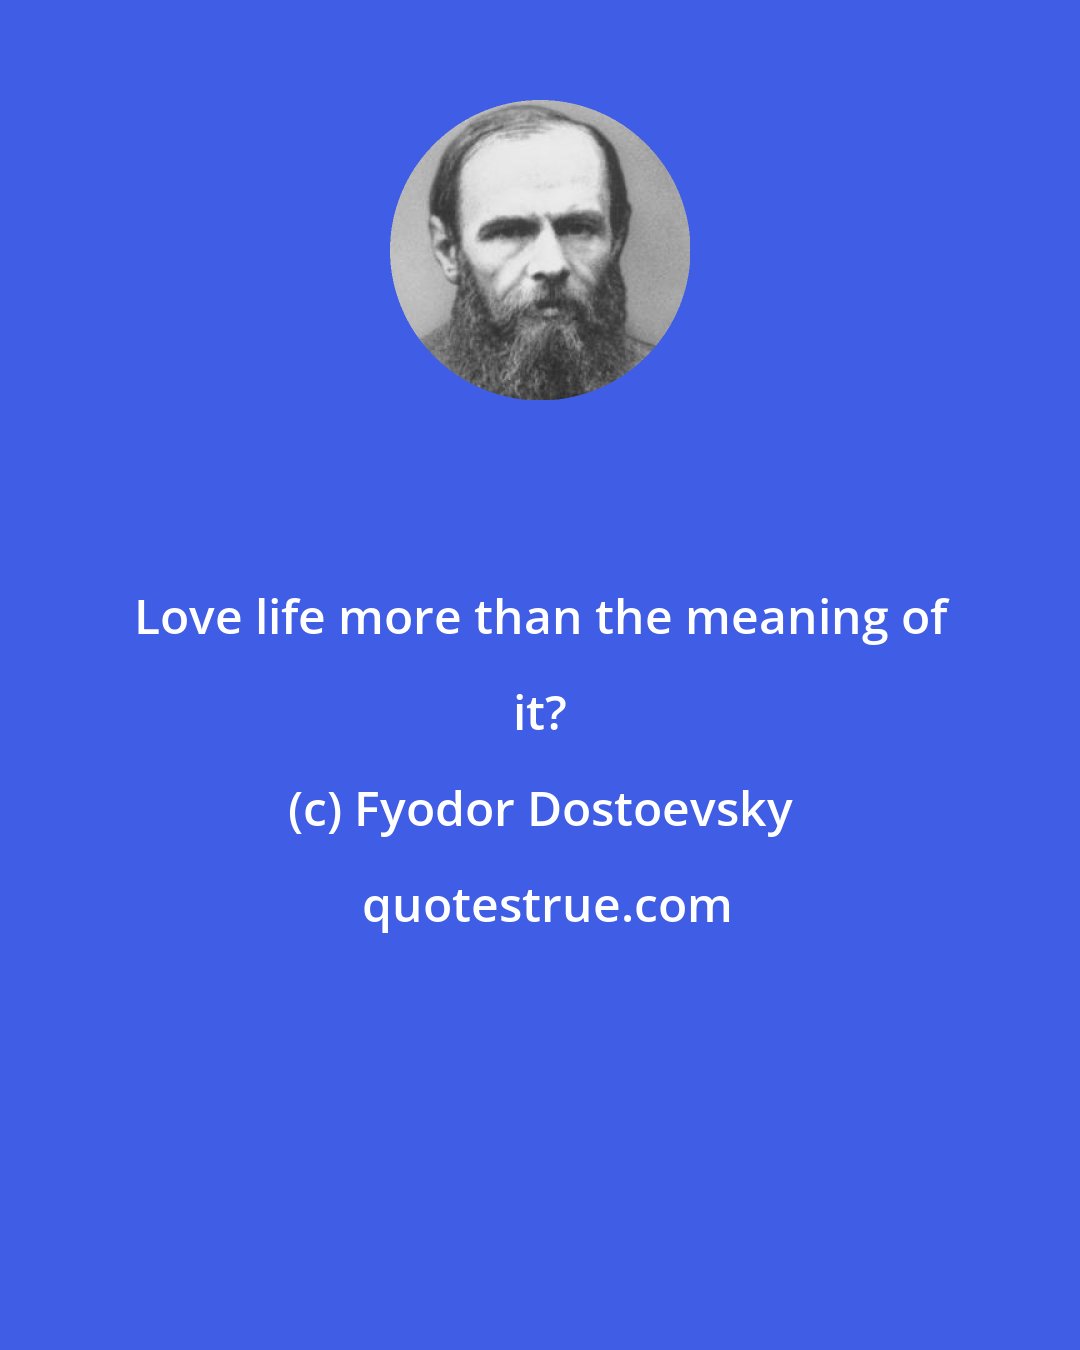 Fyodor Dostoevsky: Love life more than the meaning of it?